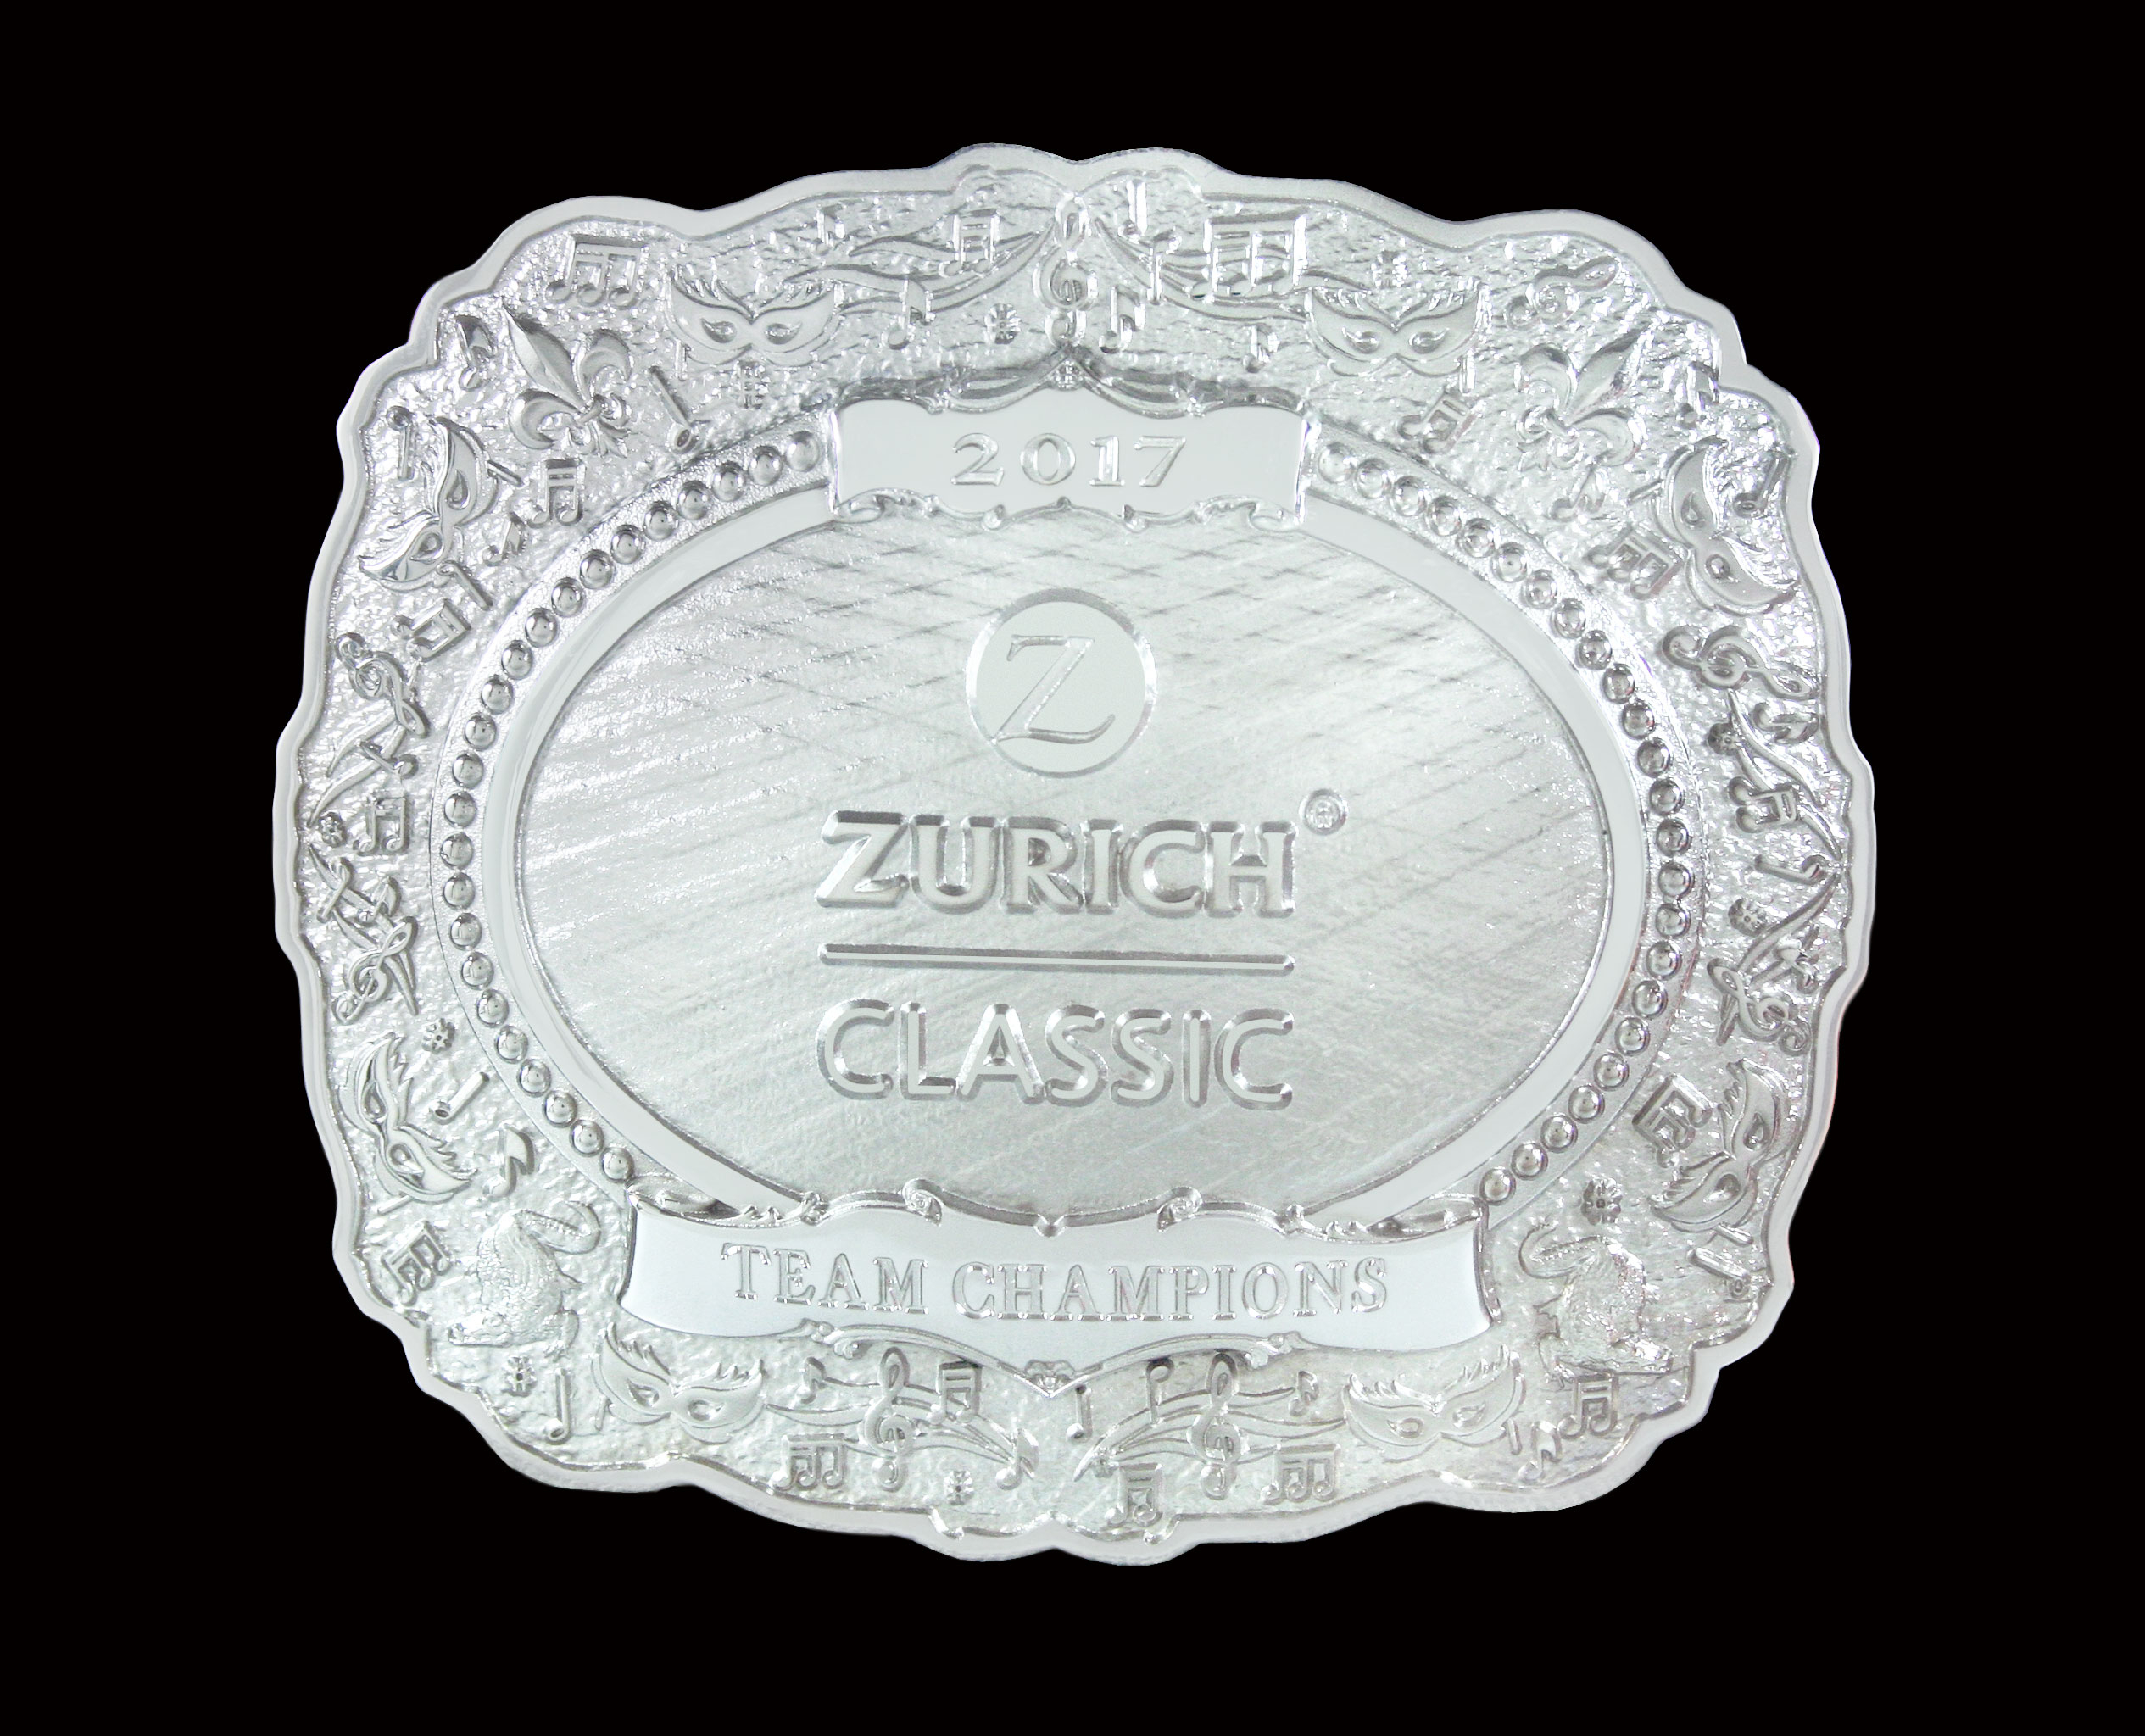 Zurich Classic Champion buckle made by Malcolm DeMille